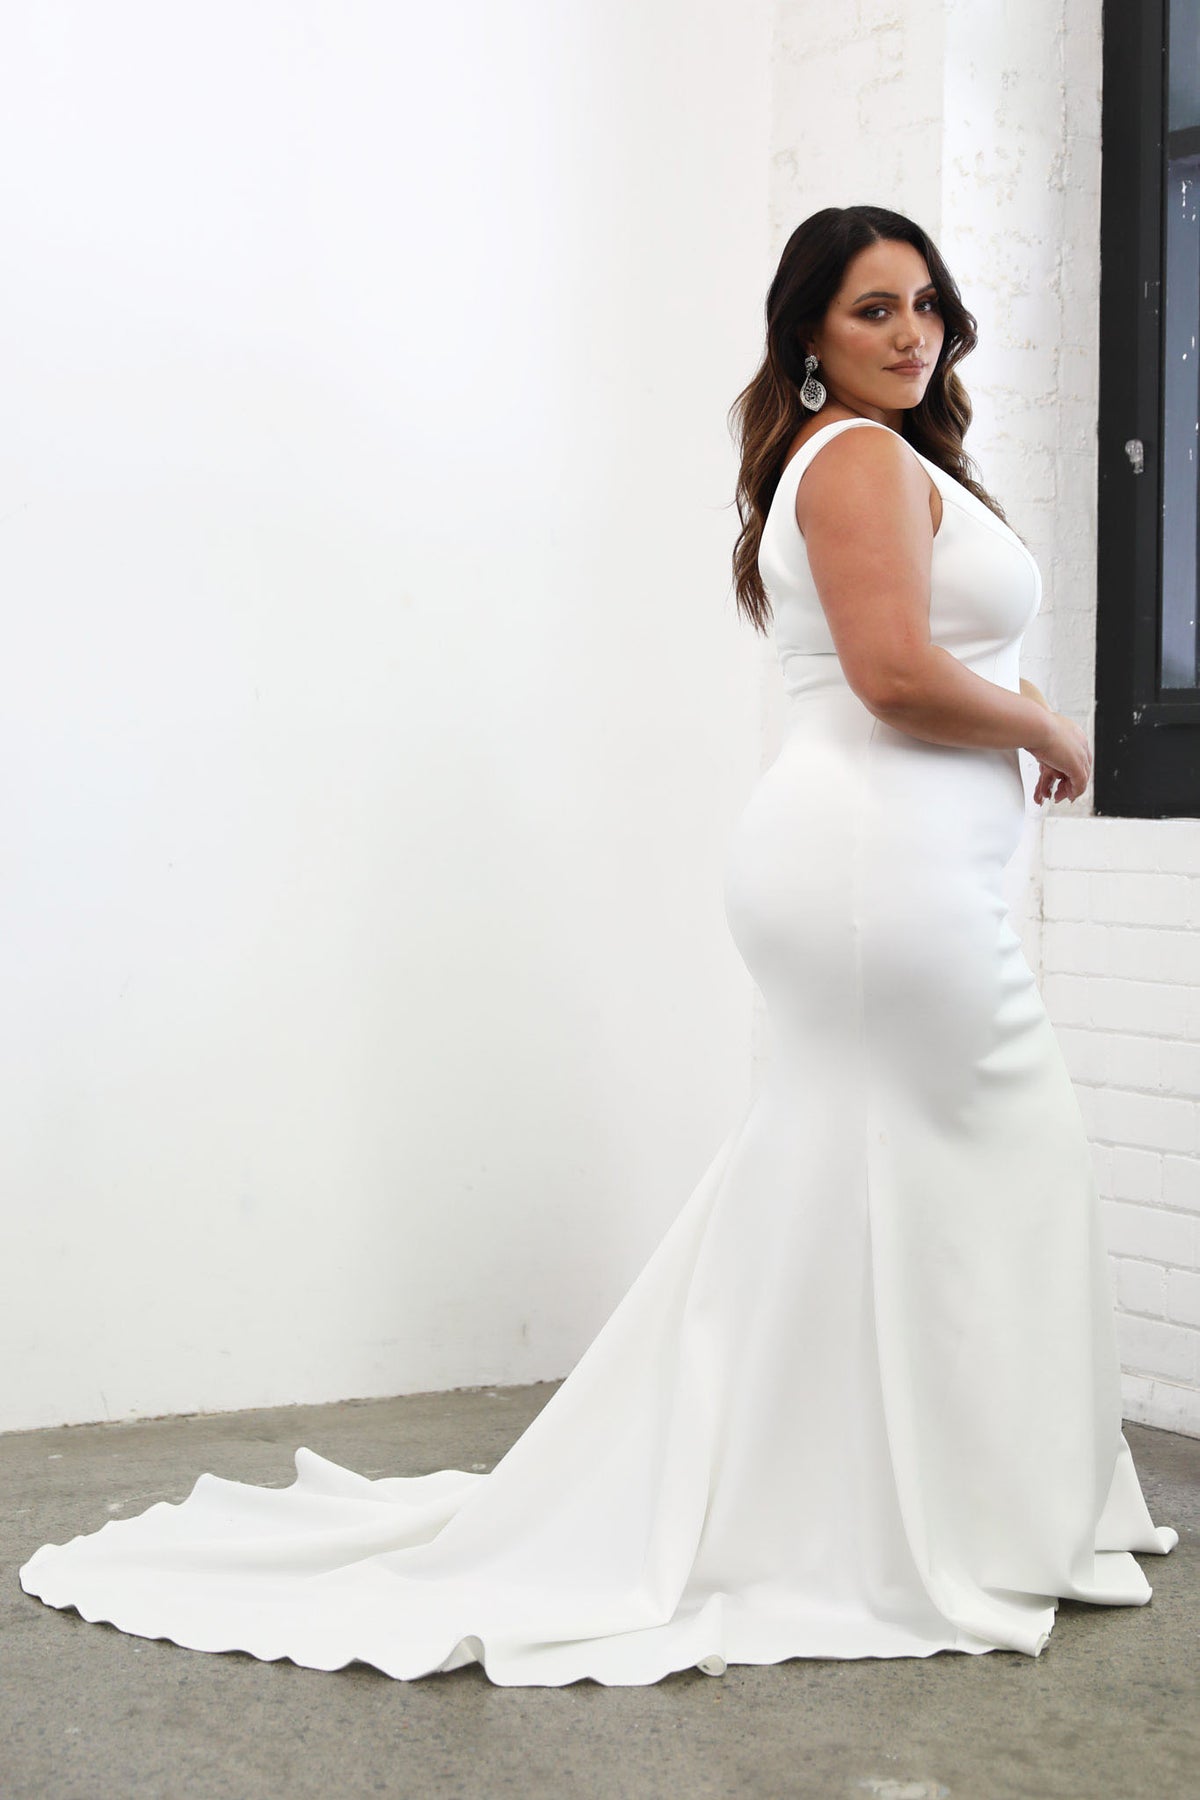 Side Image of Medium Length Sweep Train of Plus Size Fitted Crepe Wedding Dress in Mermaid Silhouette with V-Neckline, Open V-Shape Back in Ivory Colour